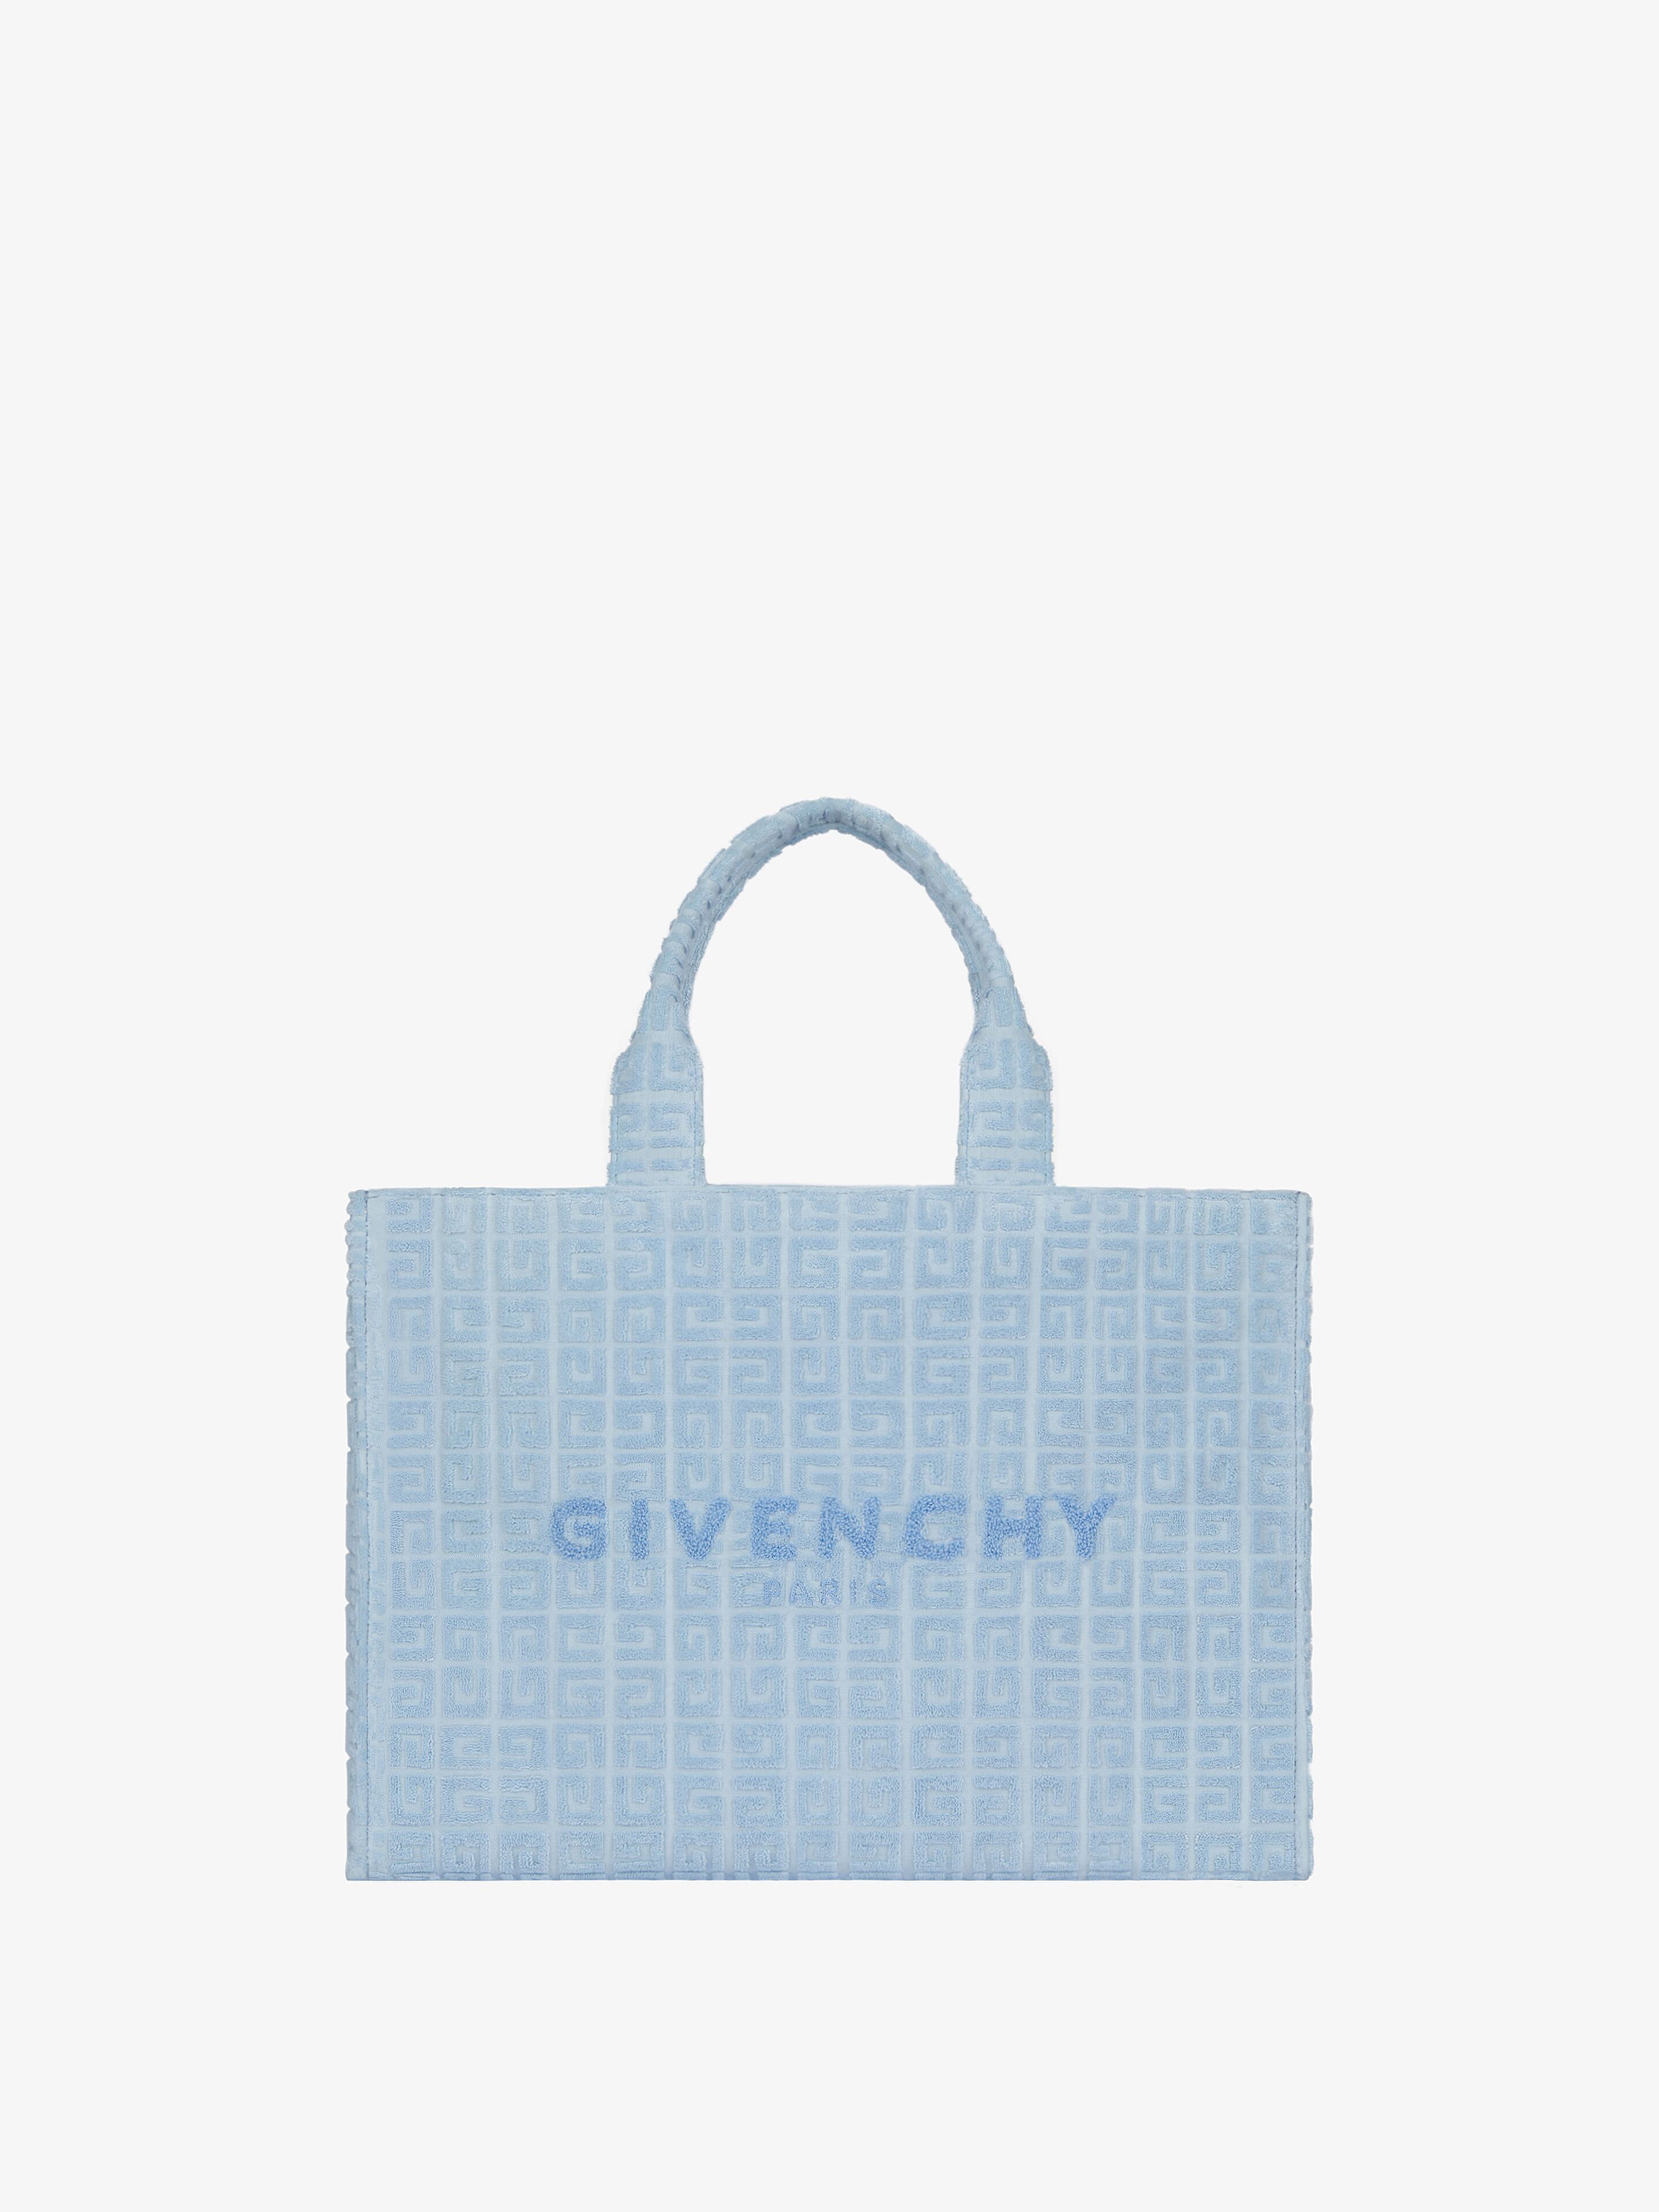 Bags Givenchy for Women | GIVENCHY Paris | Givenchy